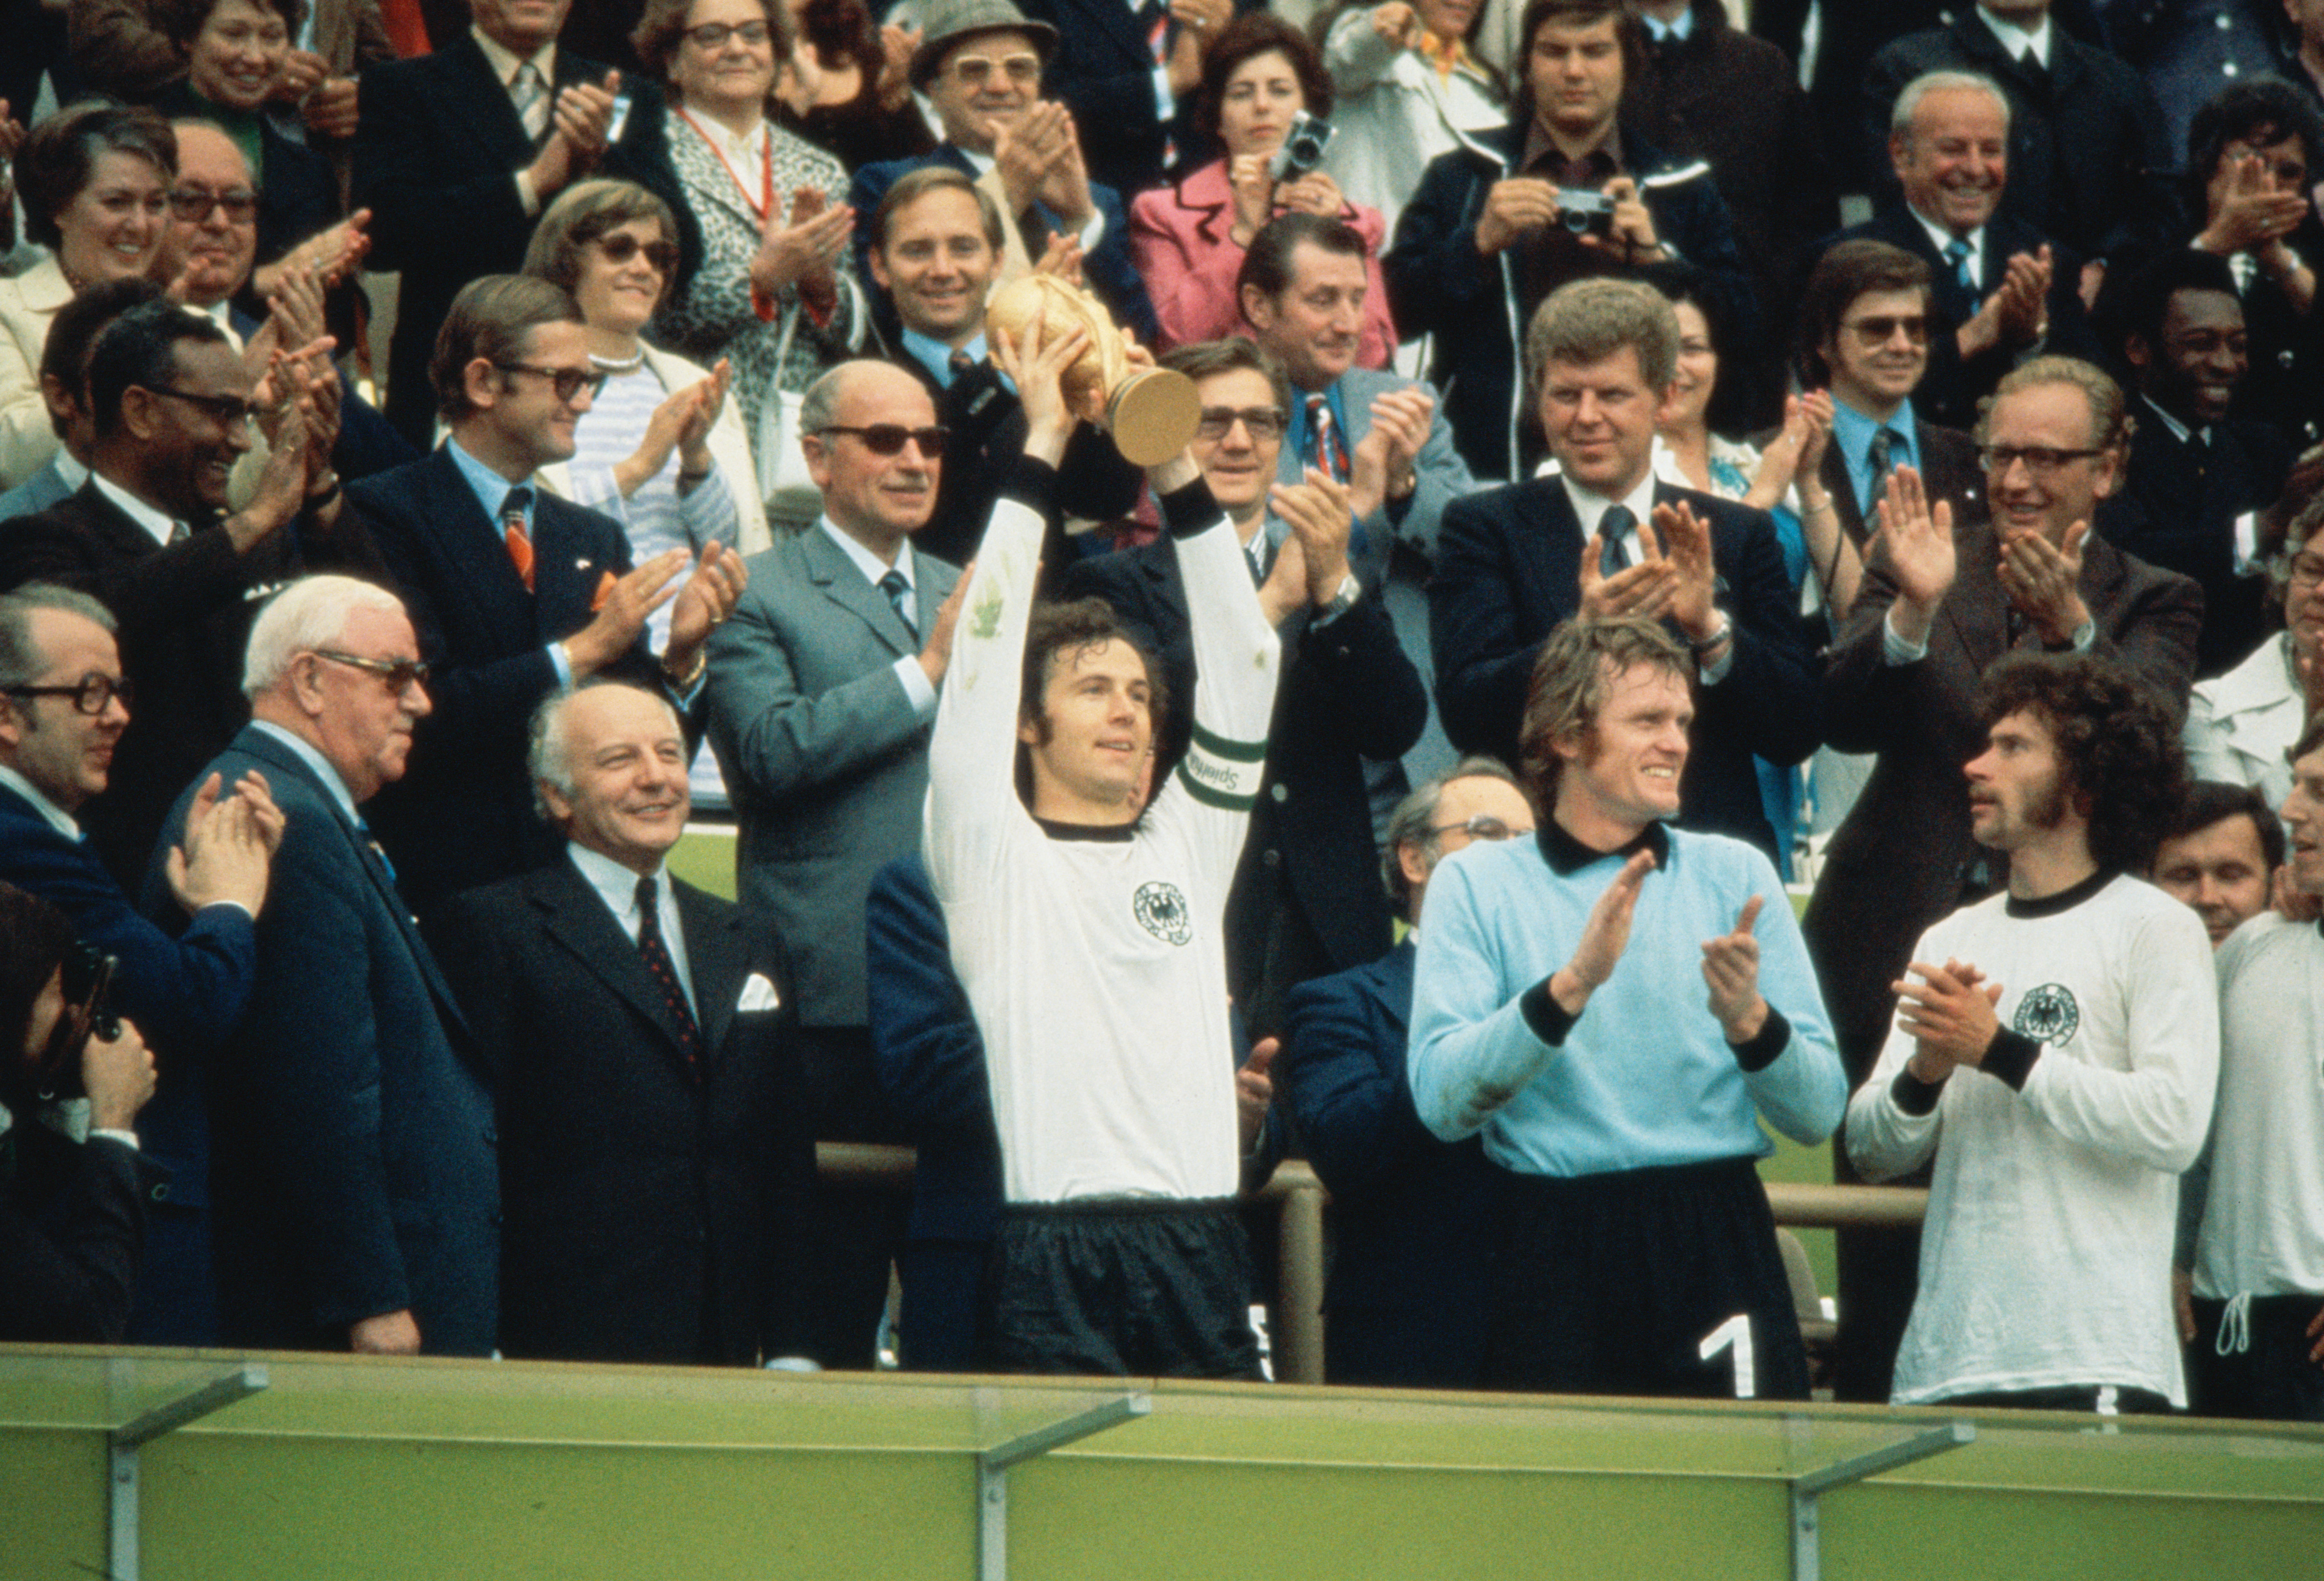 In his home ground of Munich, Franz Beckenbauer lifts Germany's second World Cup trophy